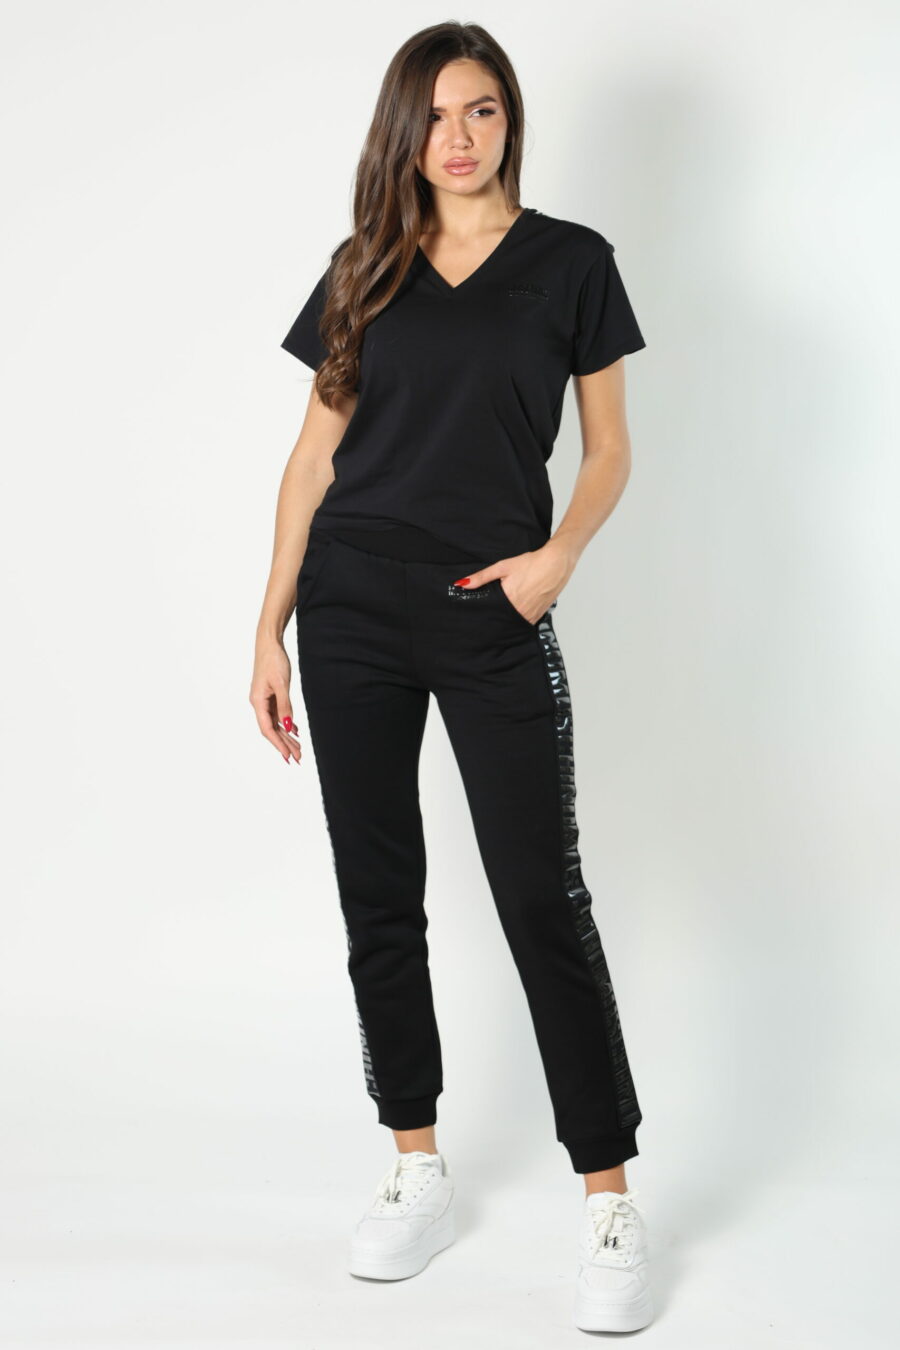 Tracksuit bottoms black with monochrome ribbon logo on sides - 8052865435499 461 scaled